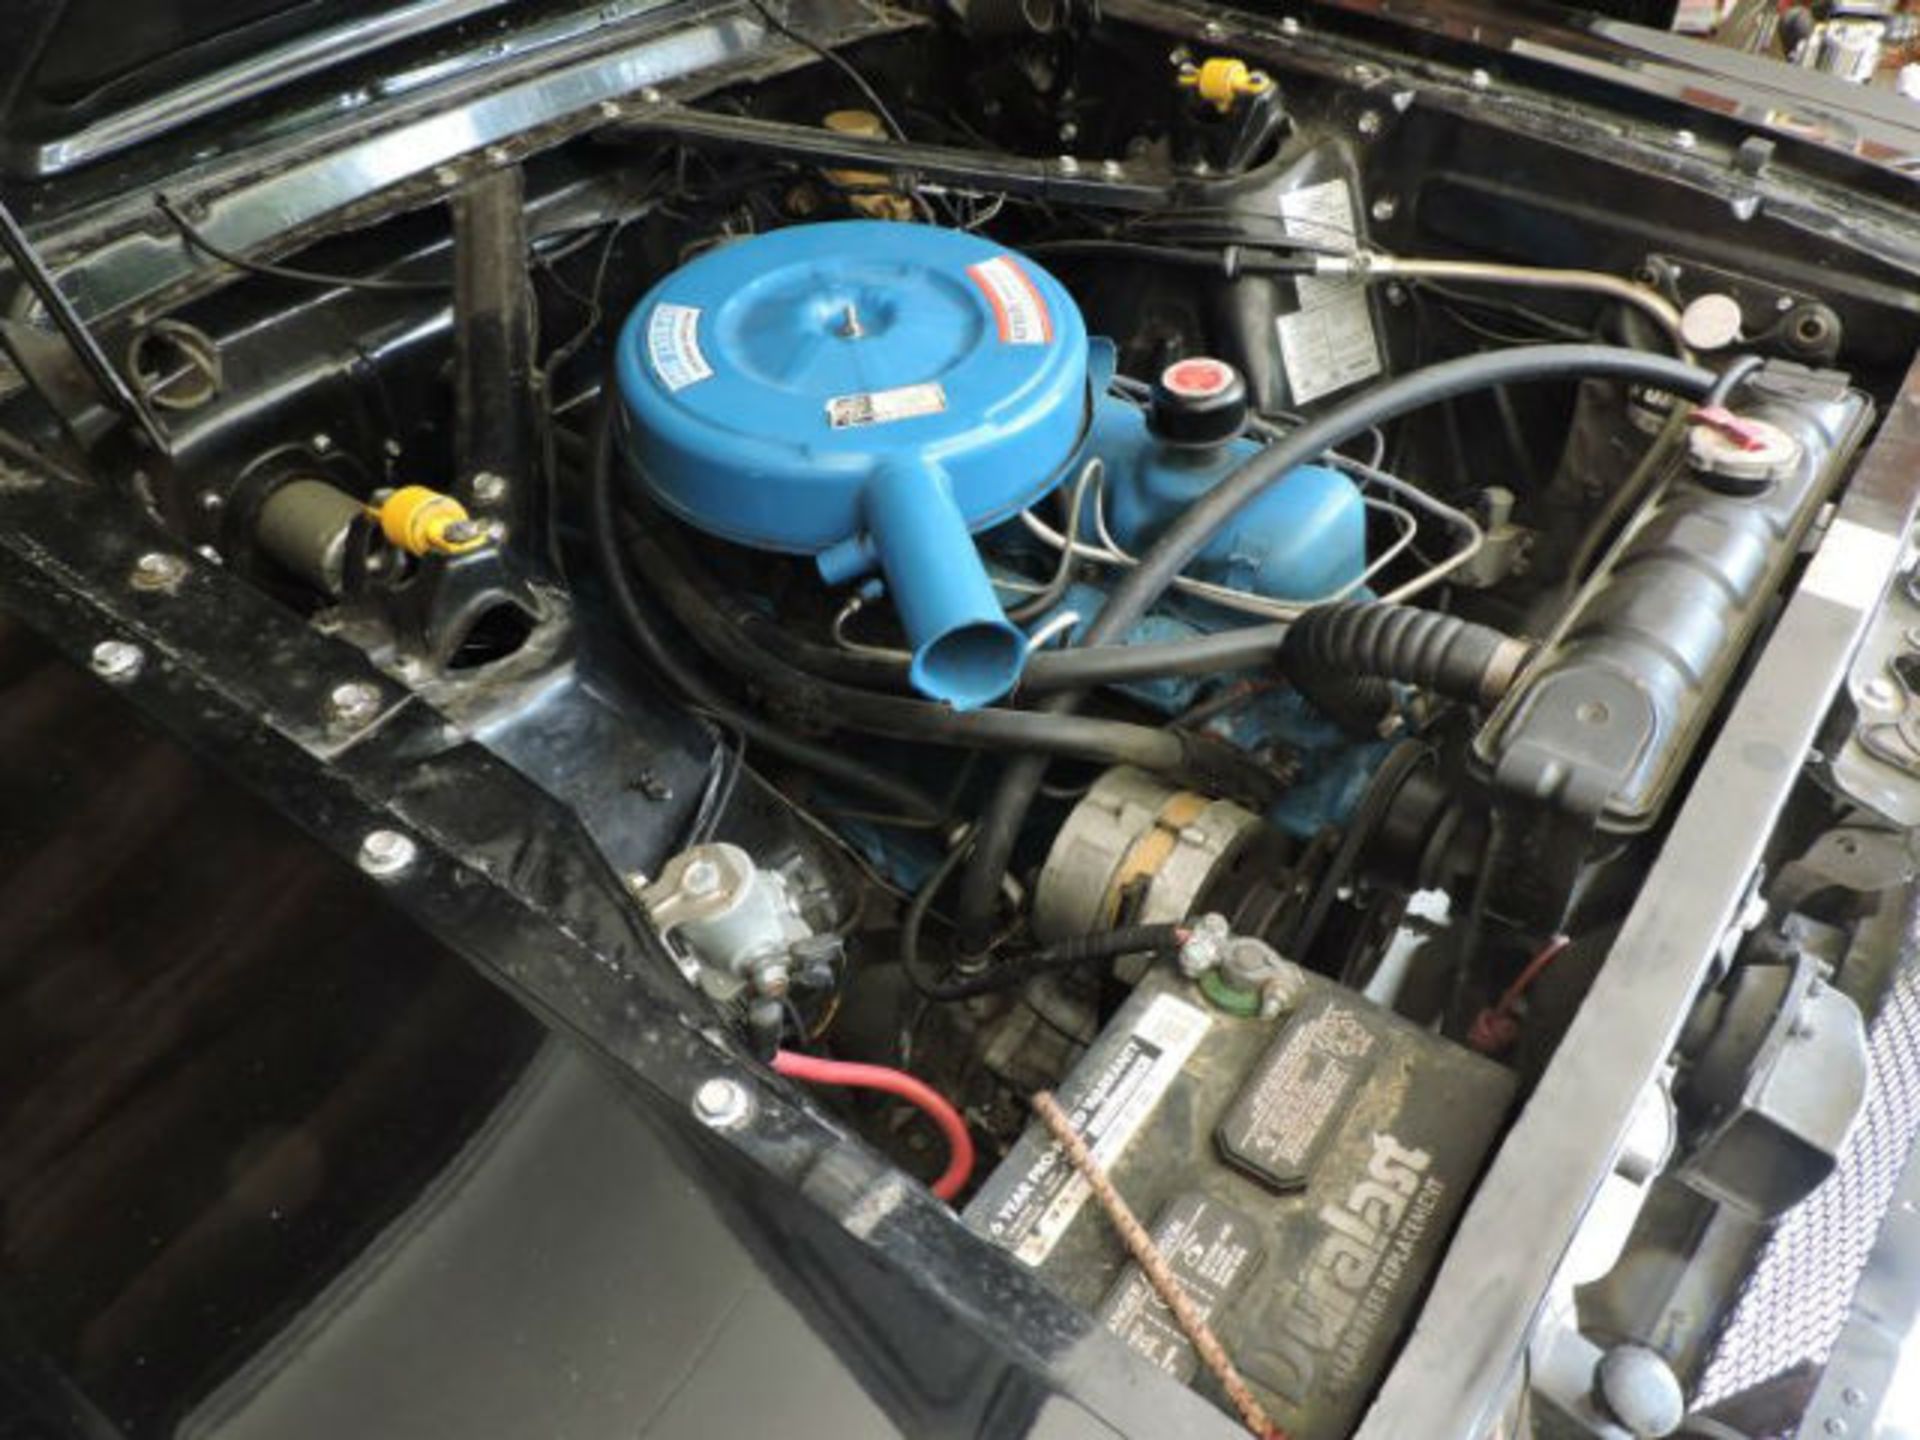 65' Ford Mustang - Year 1965, Automatic Transmission, Original Factory A/C, 6 Cylinders, Approx 72, - Image 7 of 8